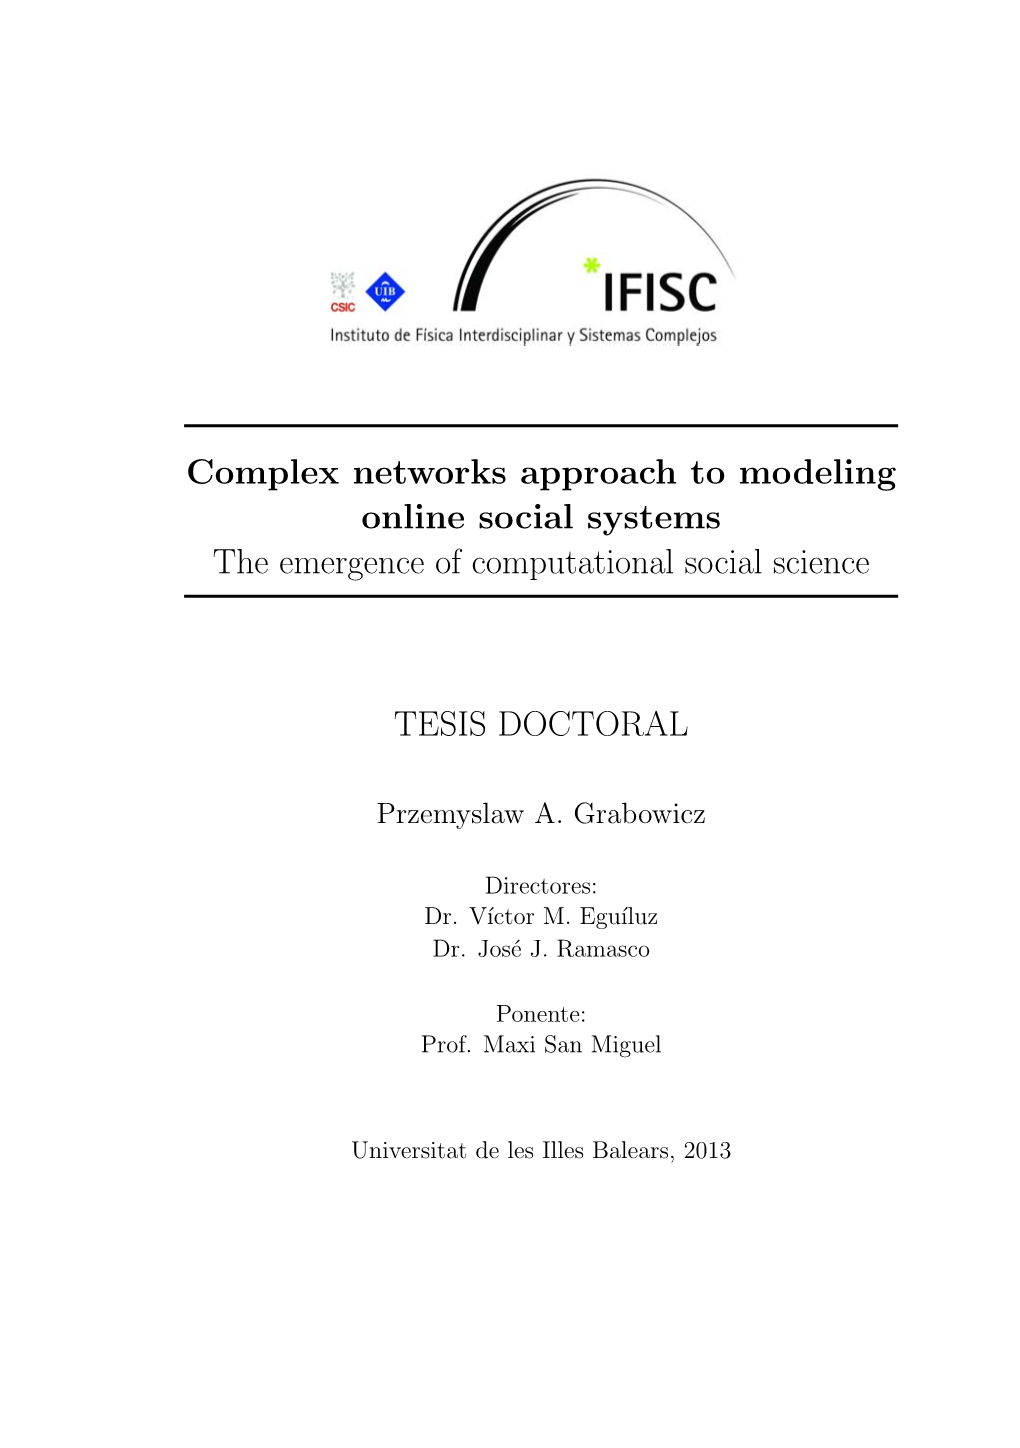 Complex Networks Approach to Modeling Online Social Systems the Emergence of Computational Social Science